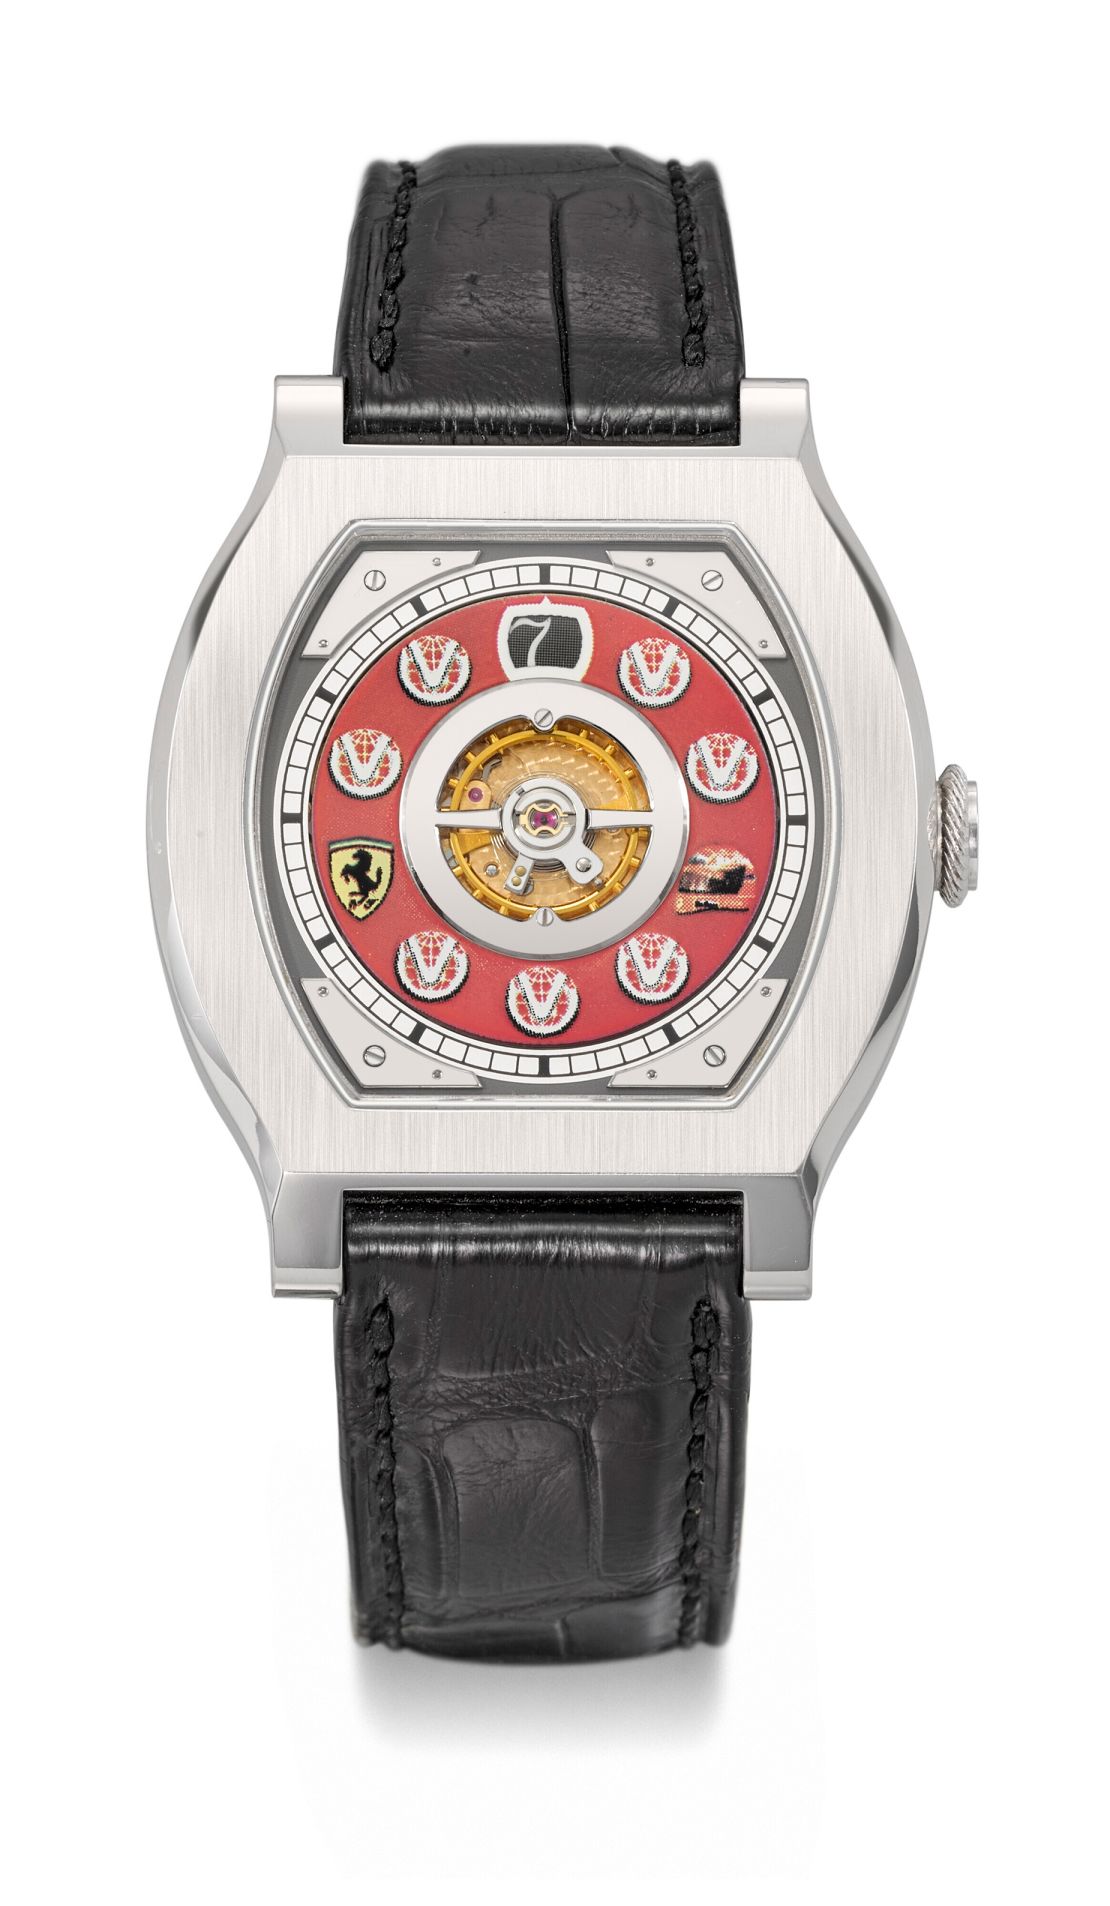 Schumacher's platinum F.P. Journe Vagabondage 1 features a striking red dial and features that celebrate his seven F1 Driver's World Championships.